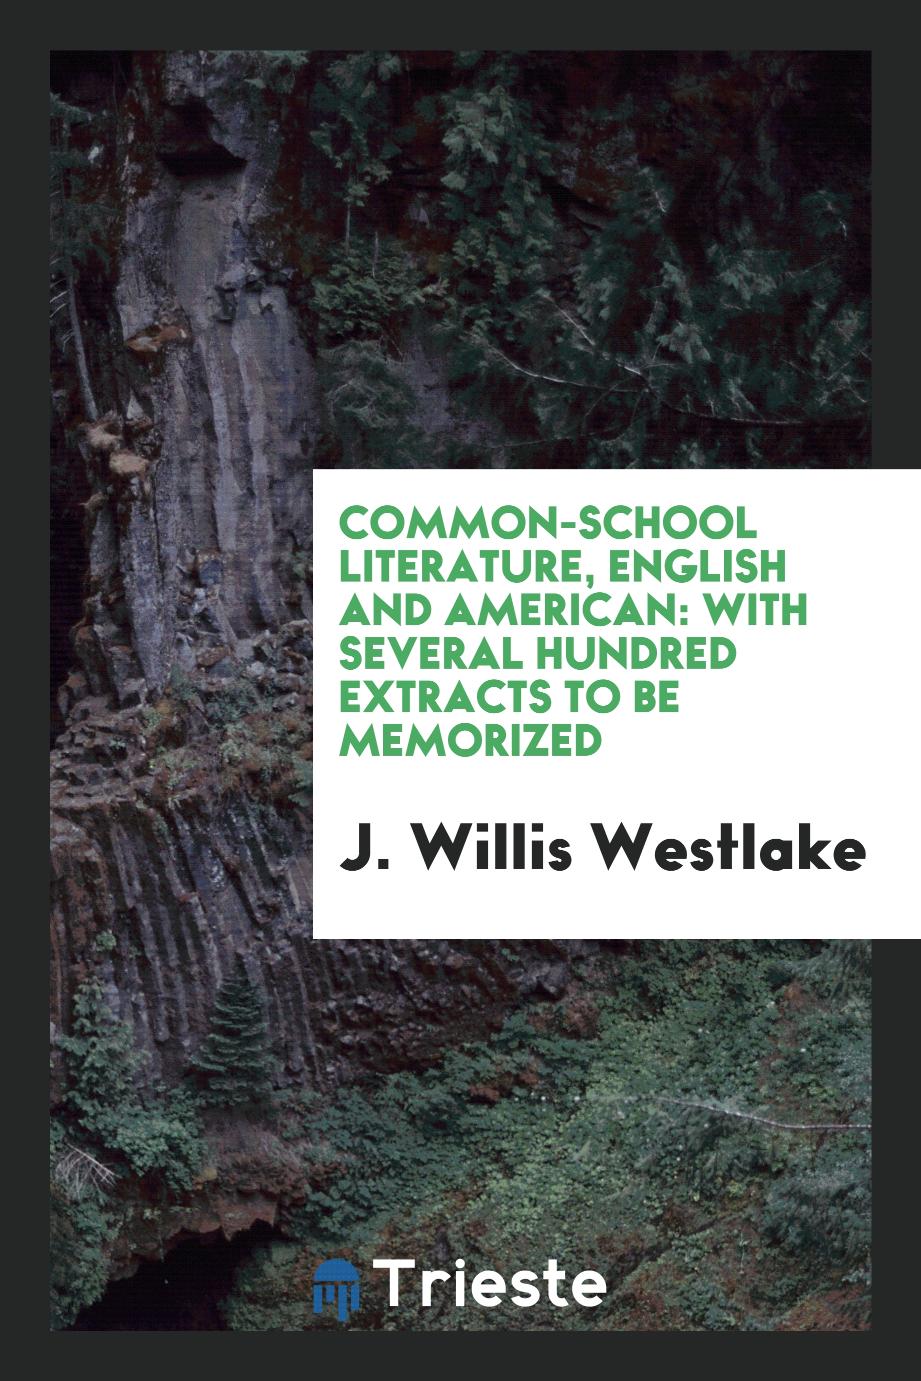 Common-School Literature, English and American: With Several Hundred Extracts to be Memorized